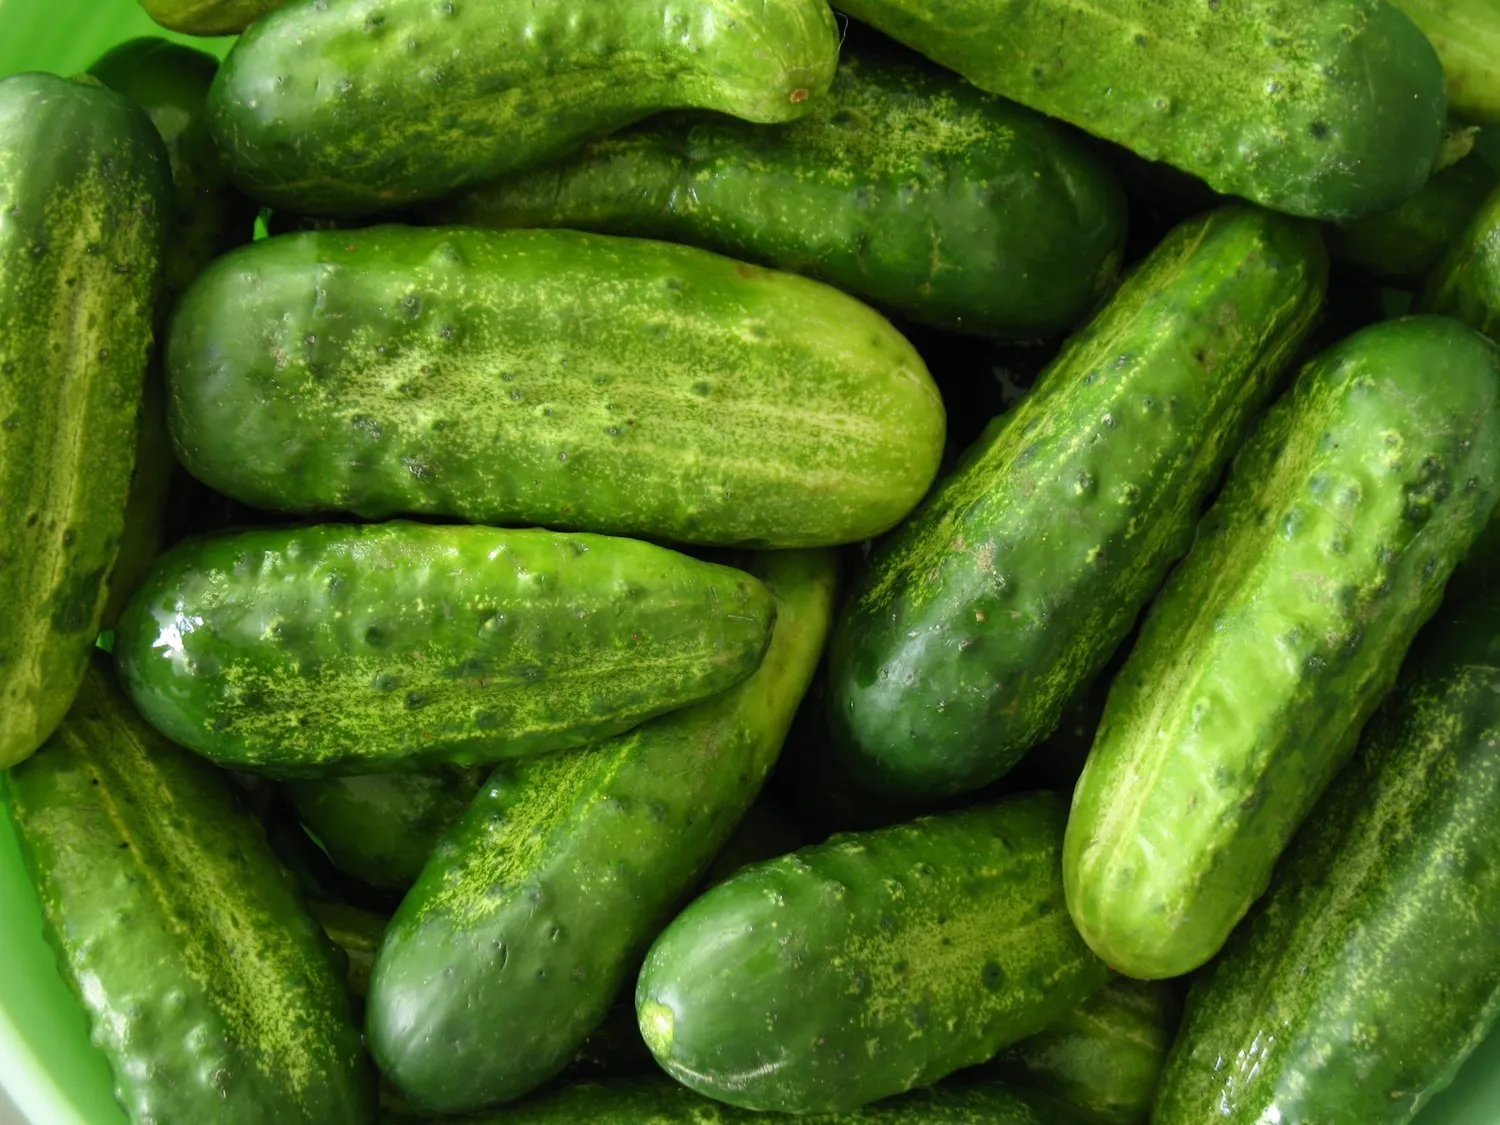 Homemade Pickles Cucumber Seeds, NON-GMO, Heirloom, Variety Sizes, Quant... - $20.95